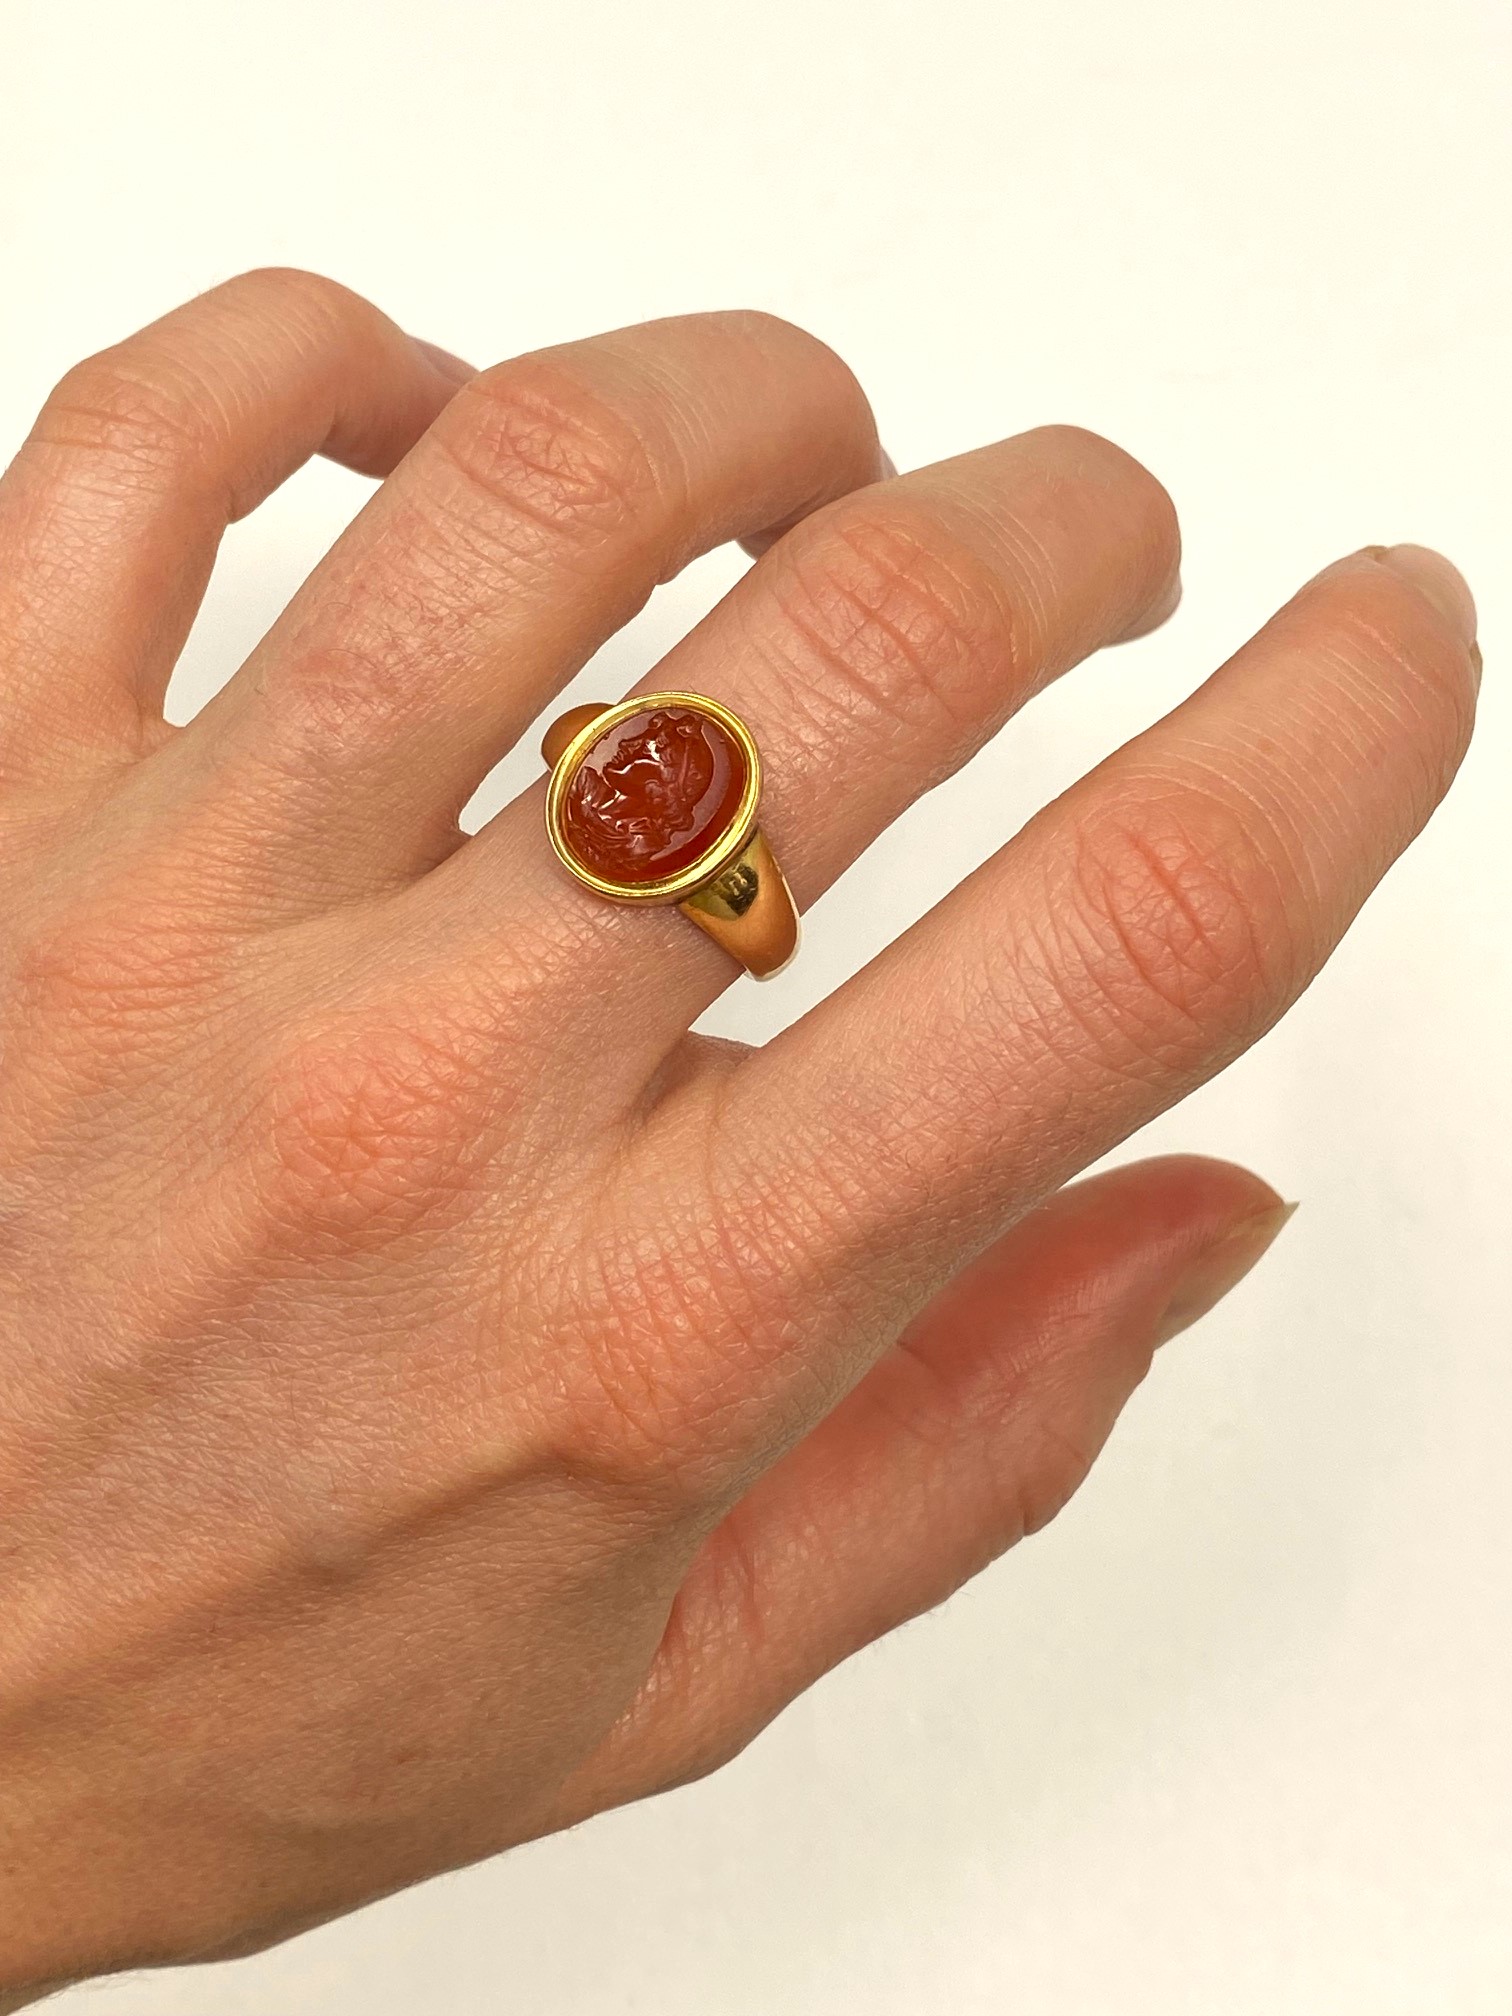 CARNELIAN INTAGLIO GOLD SIGNET RING, EARLY 19TH CENTURY - Image 6 of 6